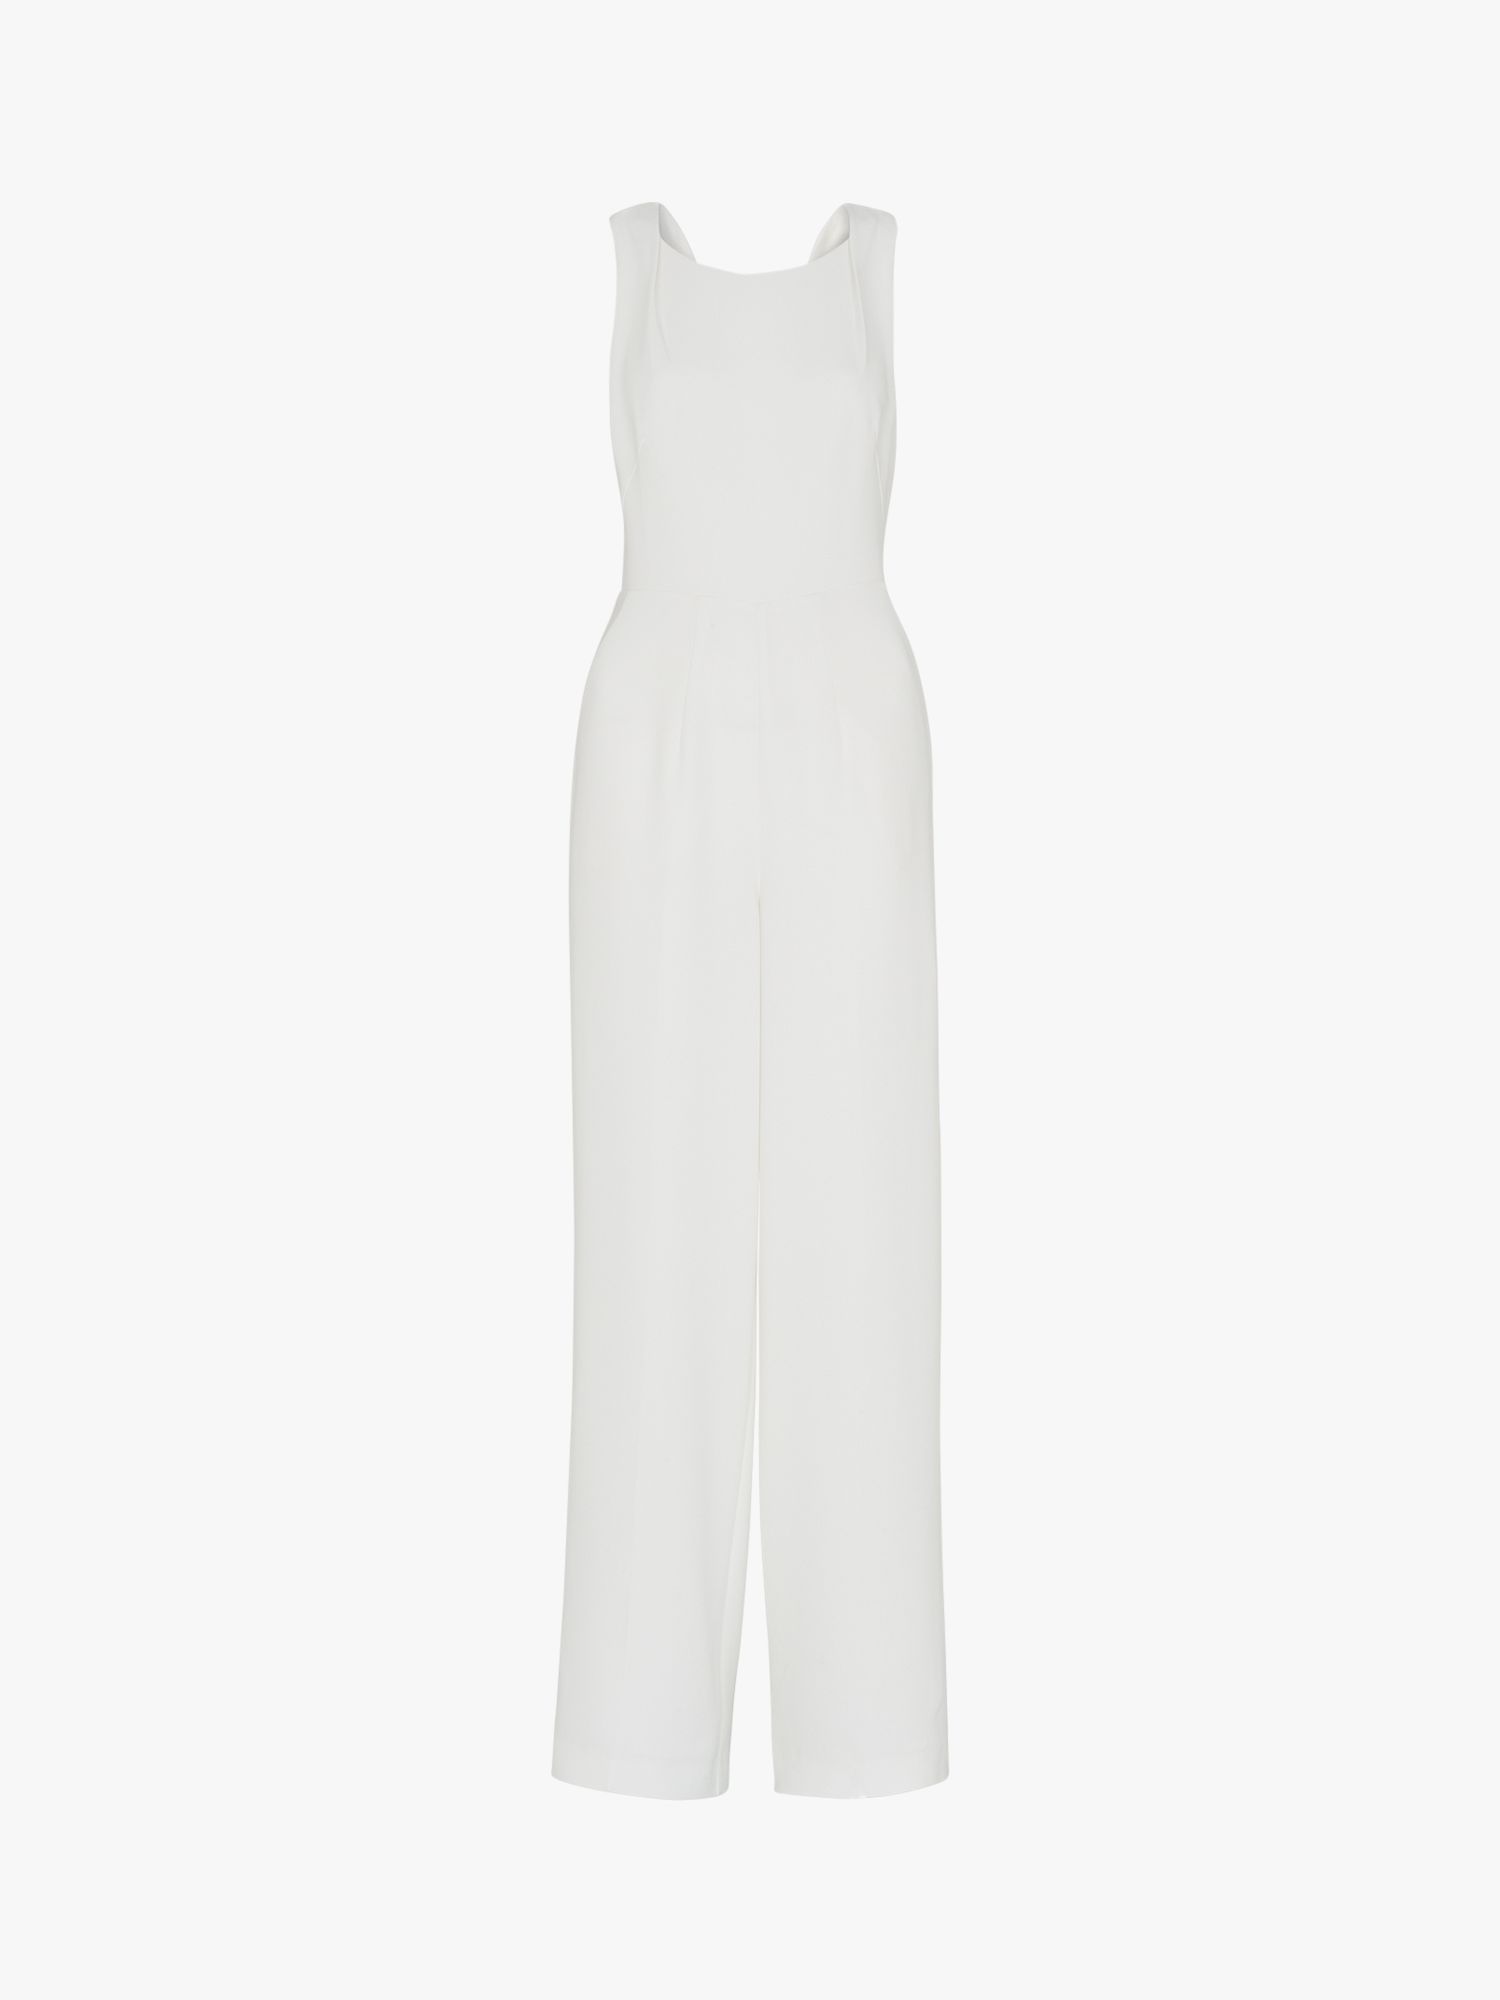 Buy Whistles Thelma Wedding Jumpsuit, Ivory Online at johnlewis.com